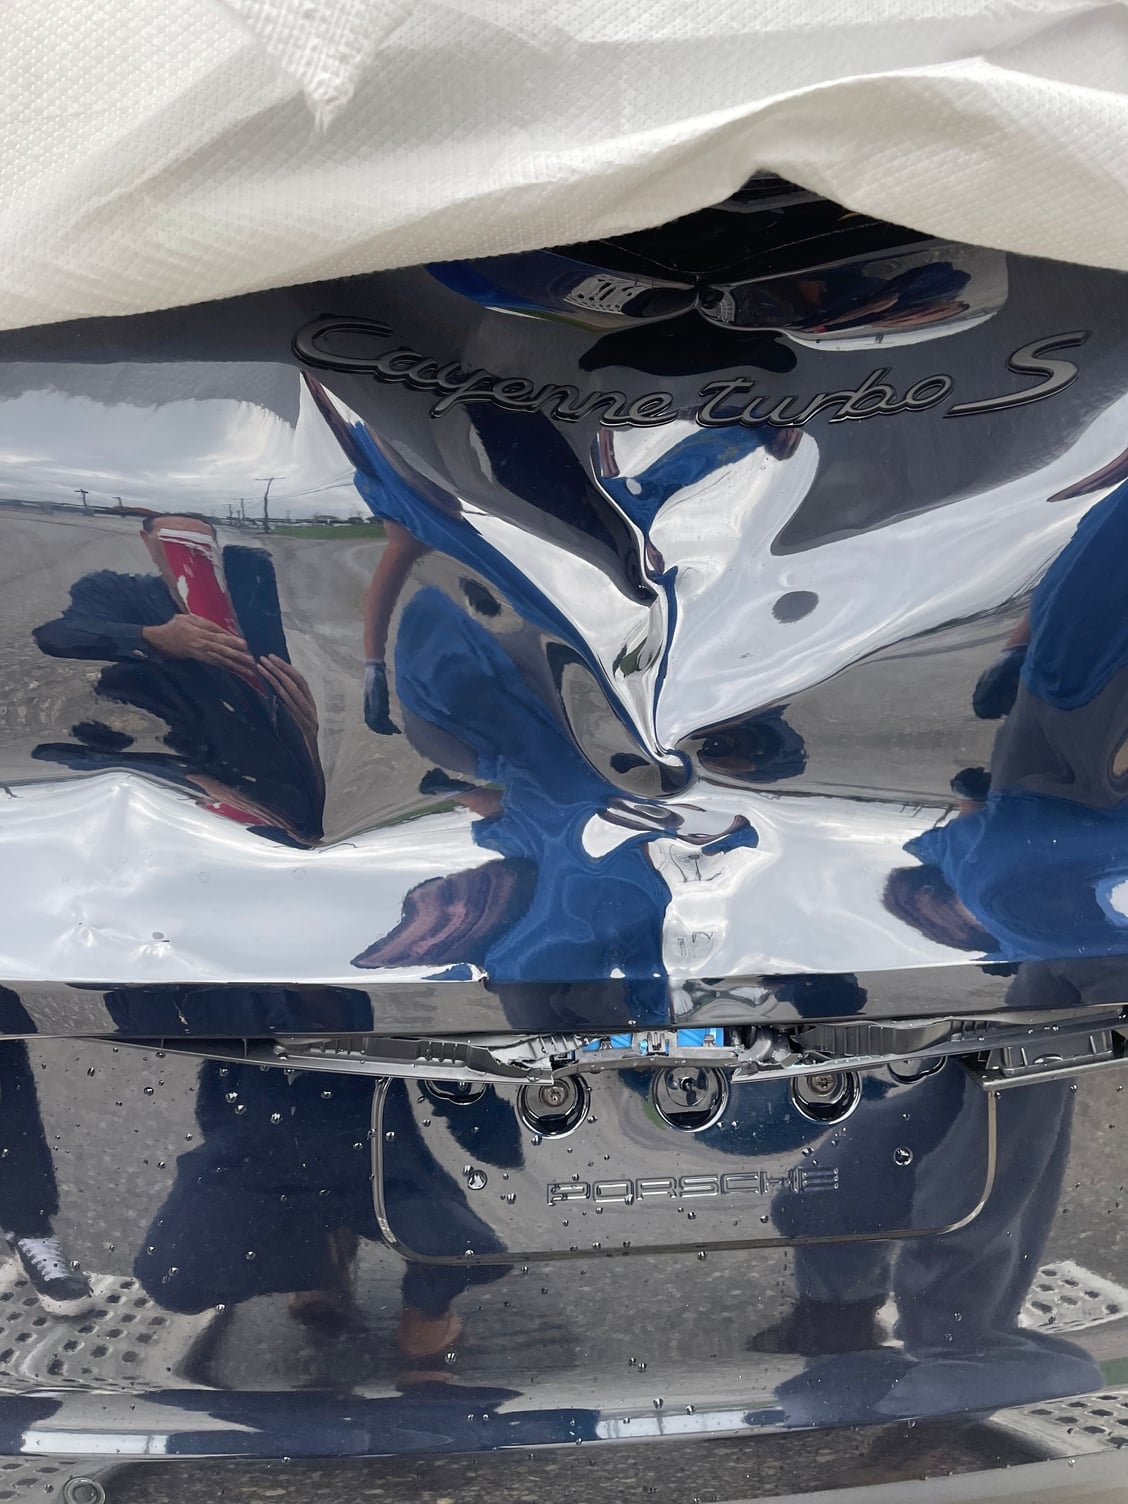 cayenne-turbo-se-coupe-damaged-on-truck-from-port-to-dealer-advice